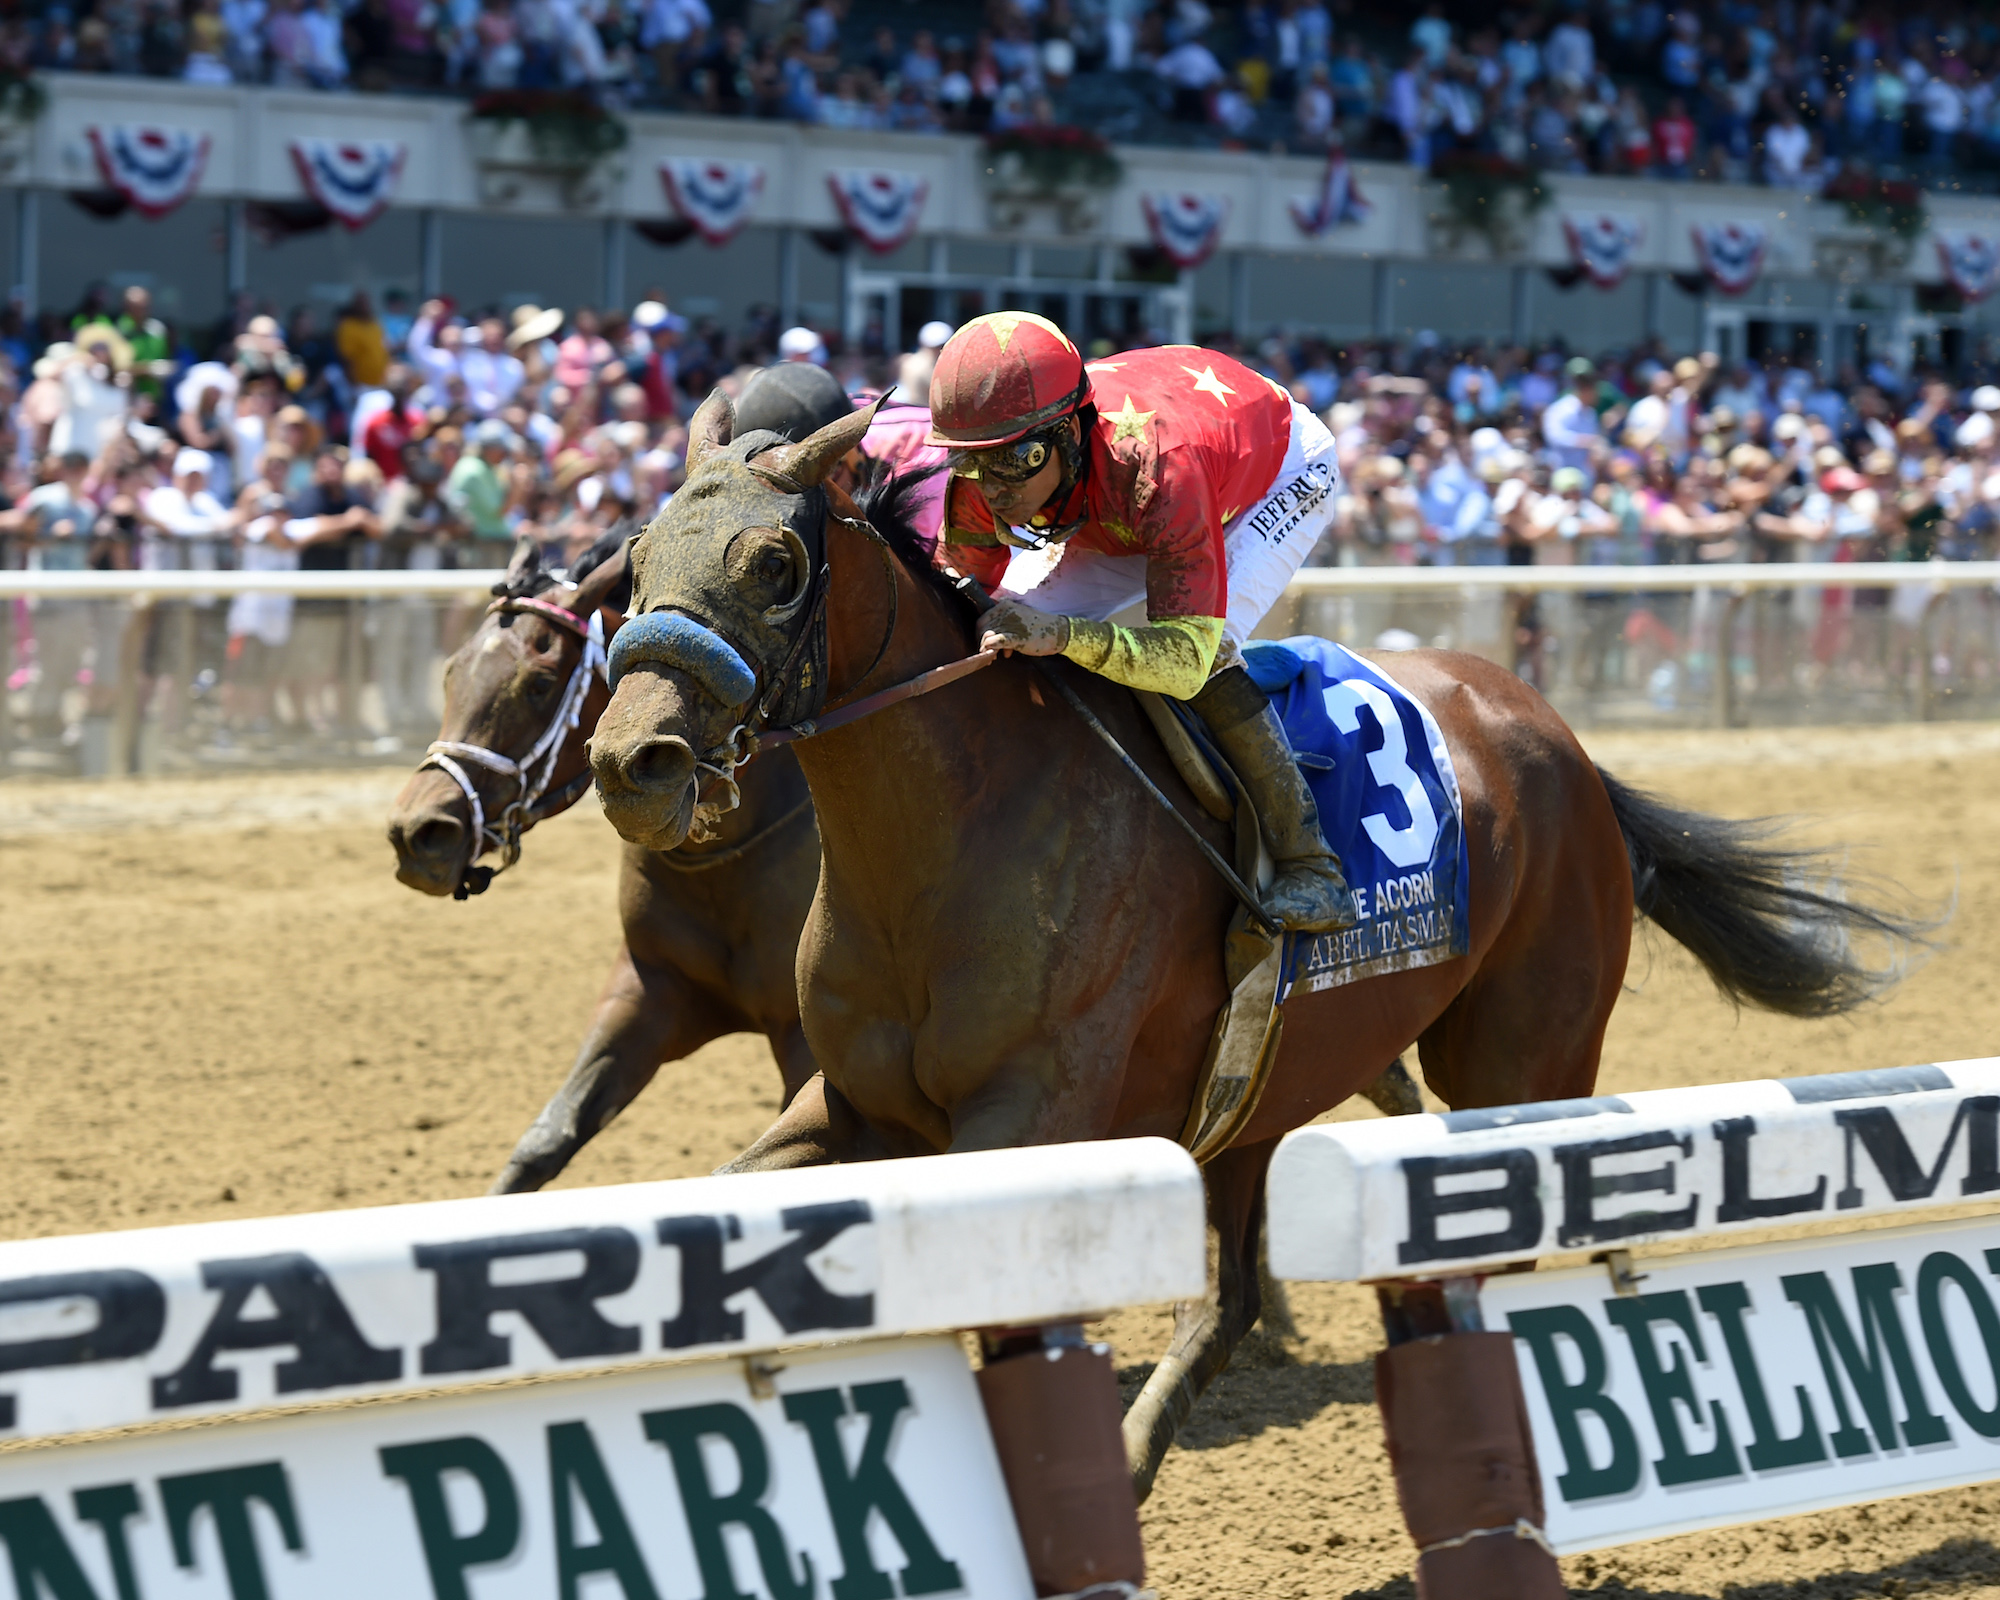 Abel Tasman winning the Acorn Stakes at Belmont Park in June. The filly failed to reach her reserve when Clearsky sent her to the sales, so it was stroke of luck that they kept her. Photo: Joe Labozzetta/NYRA.com